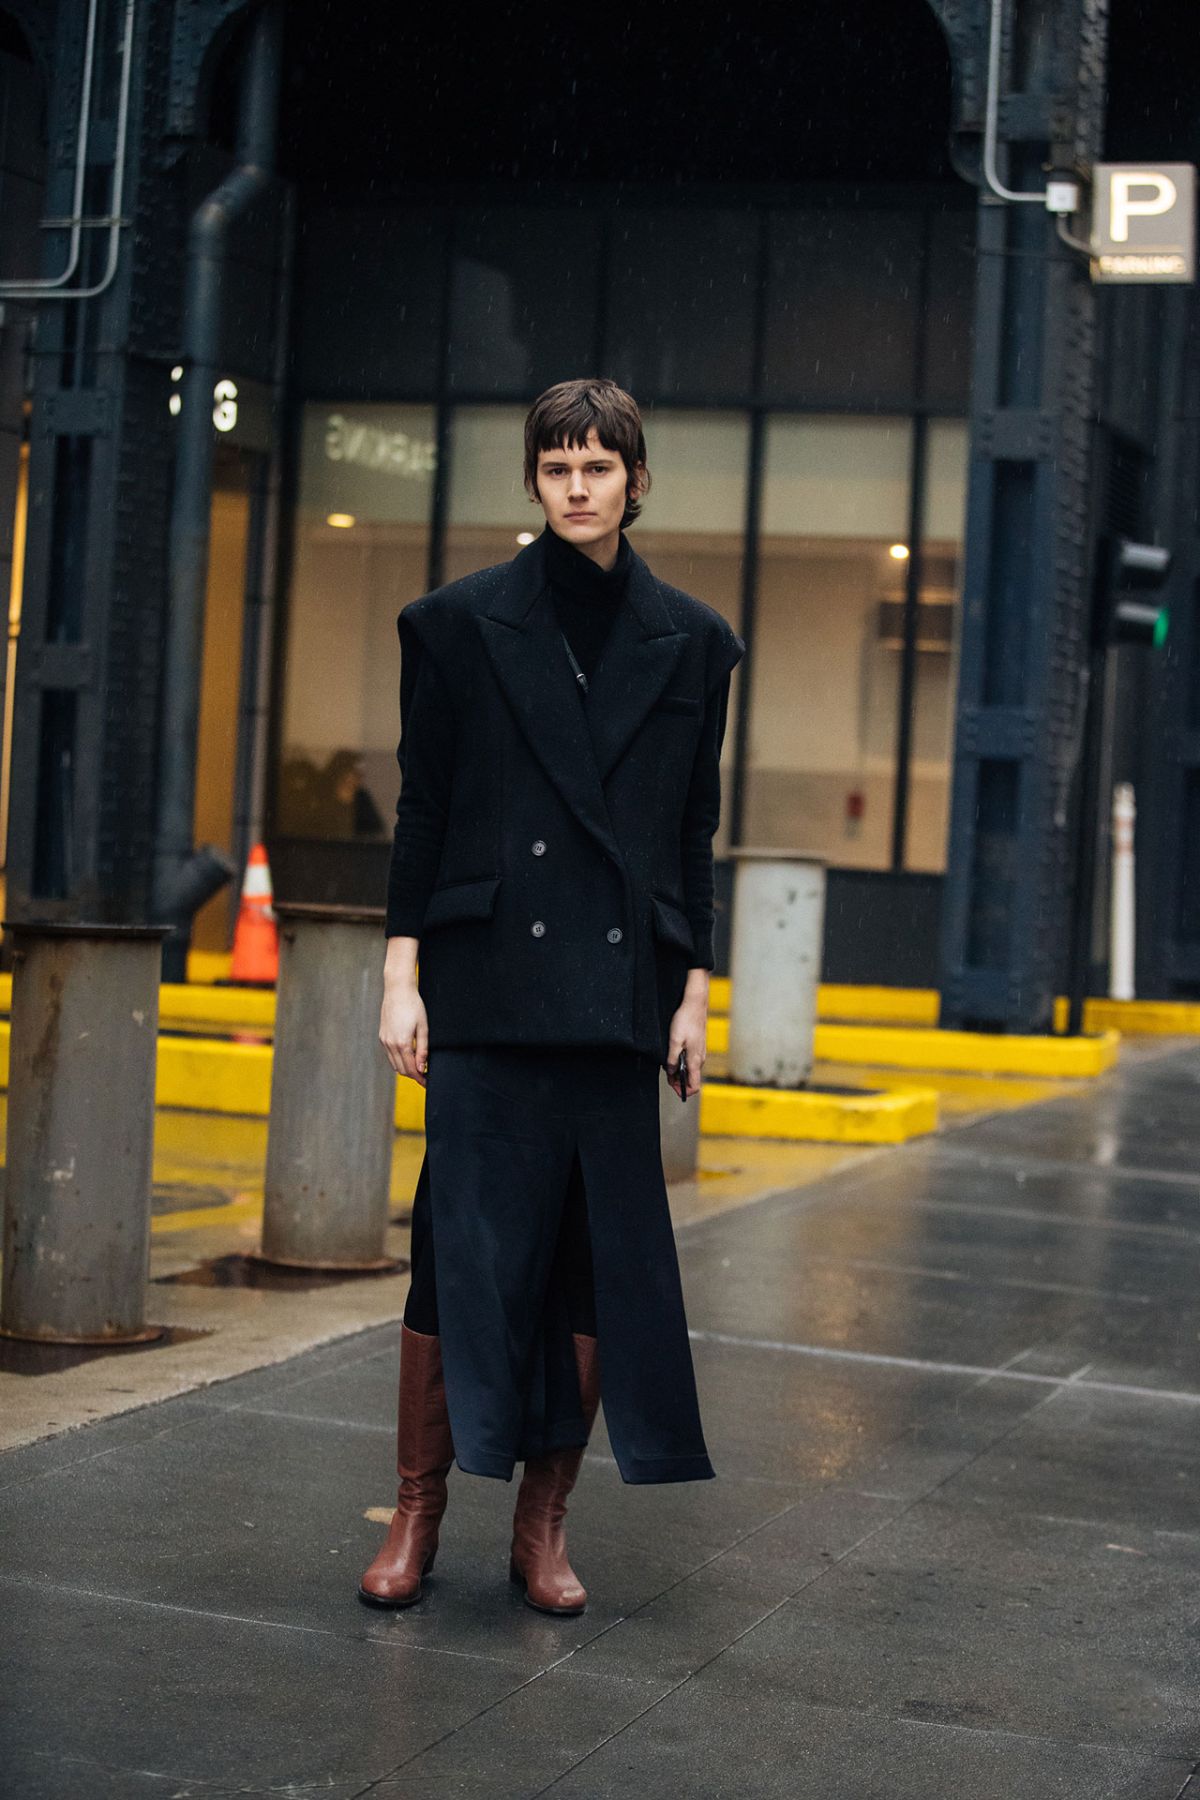 Jamily Wernke Meurer Street Style at New York Fashion Week Fall-Winter 2020 by Melodie Jeng